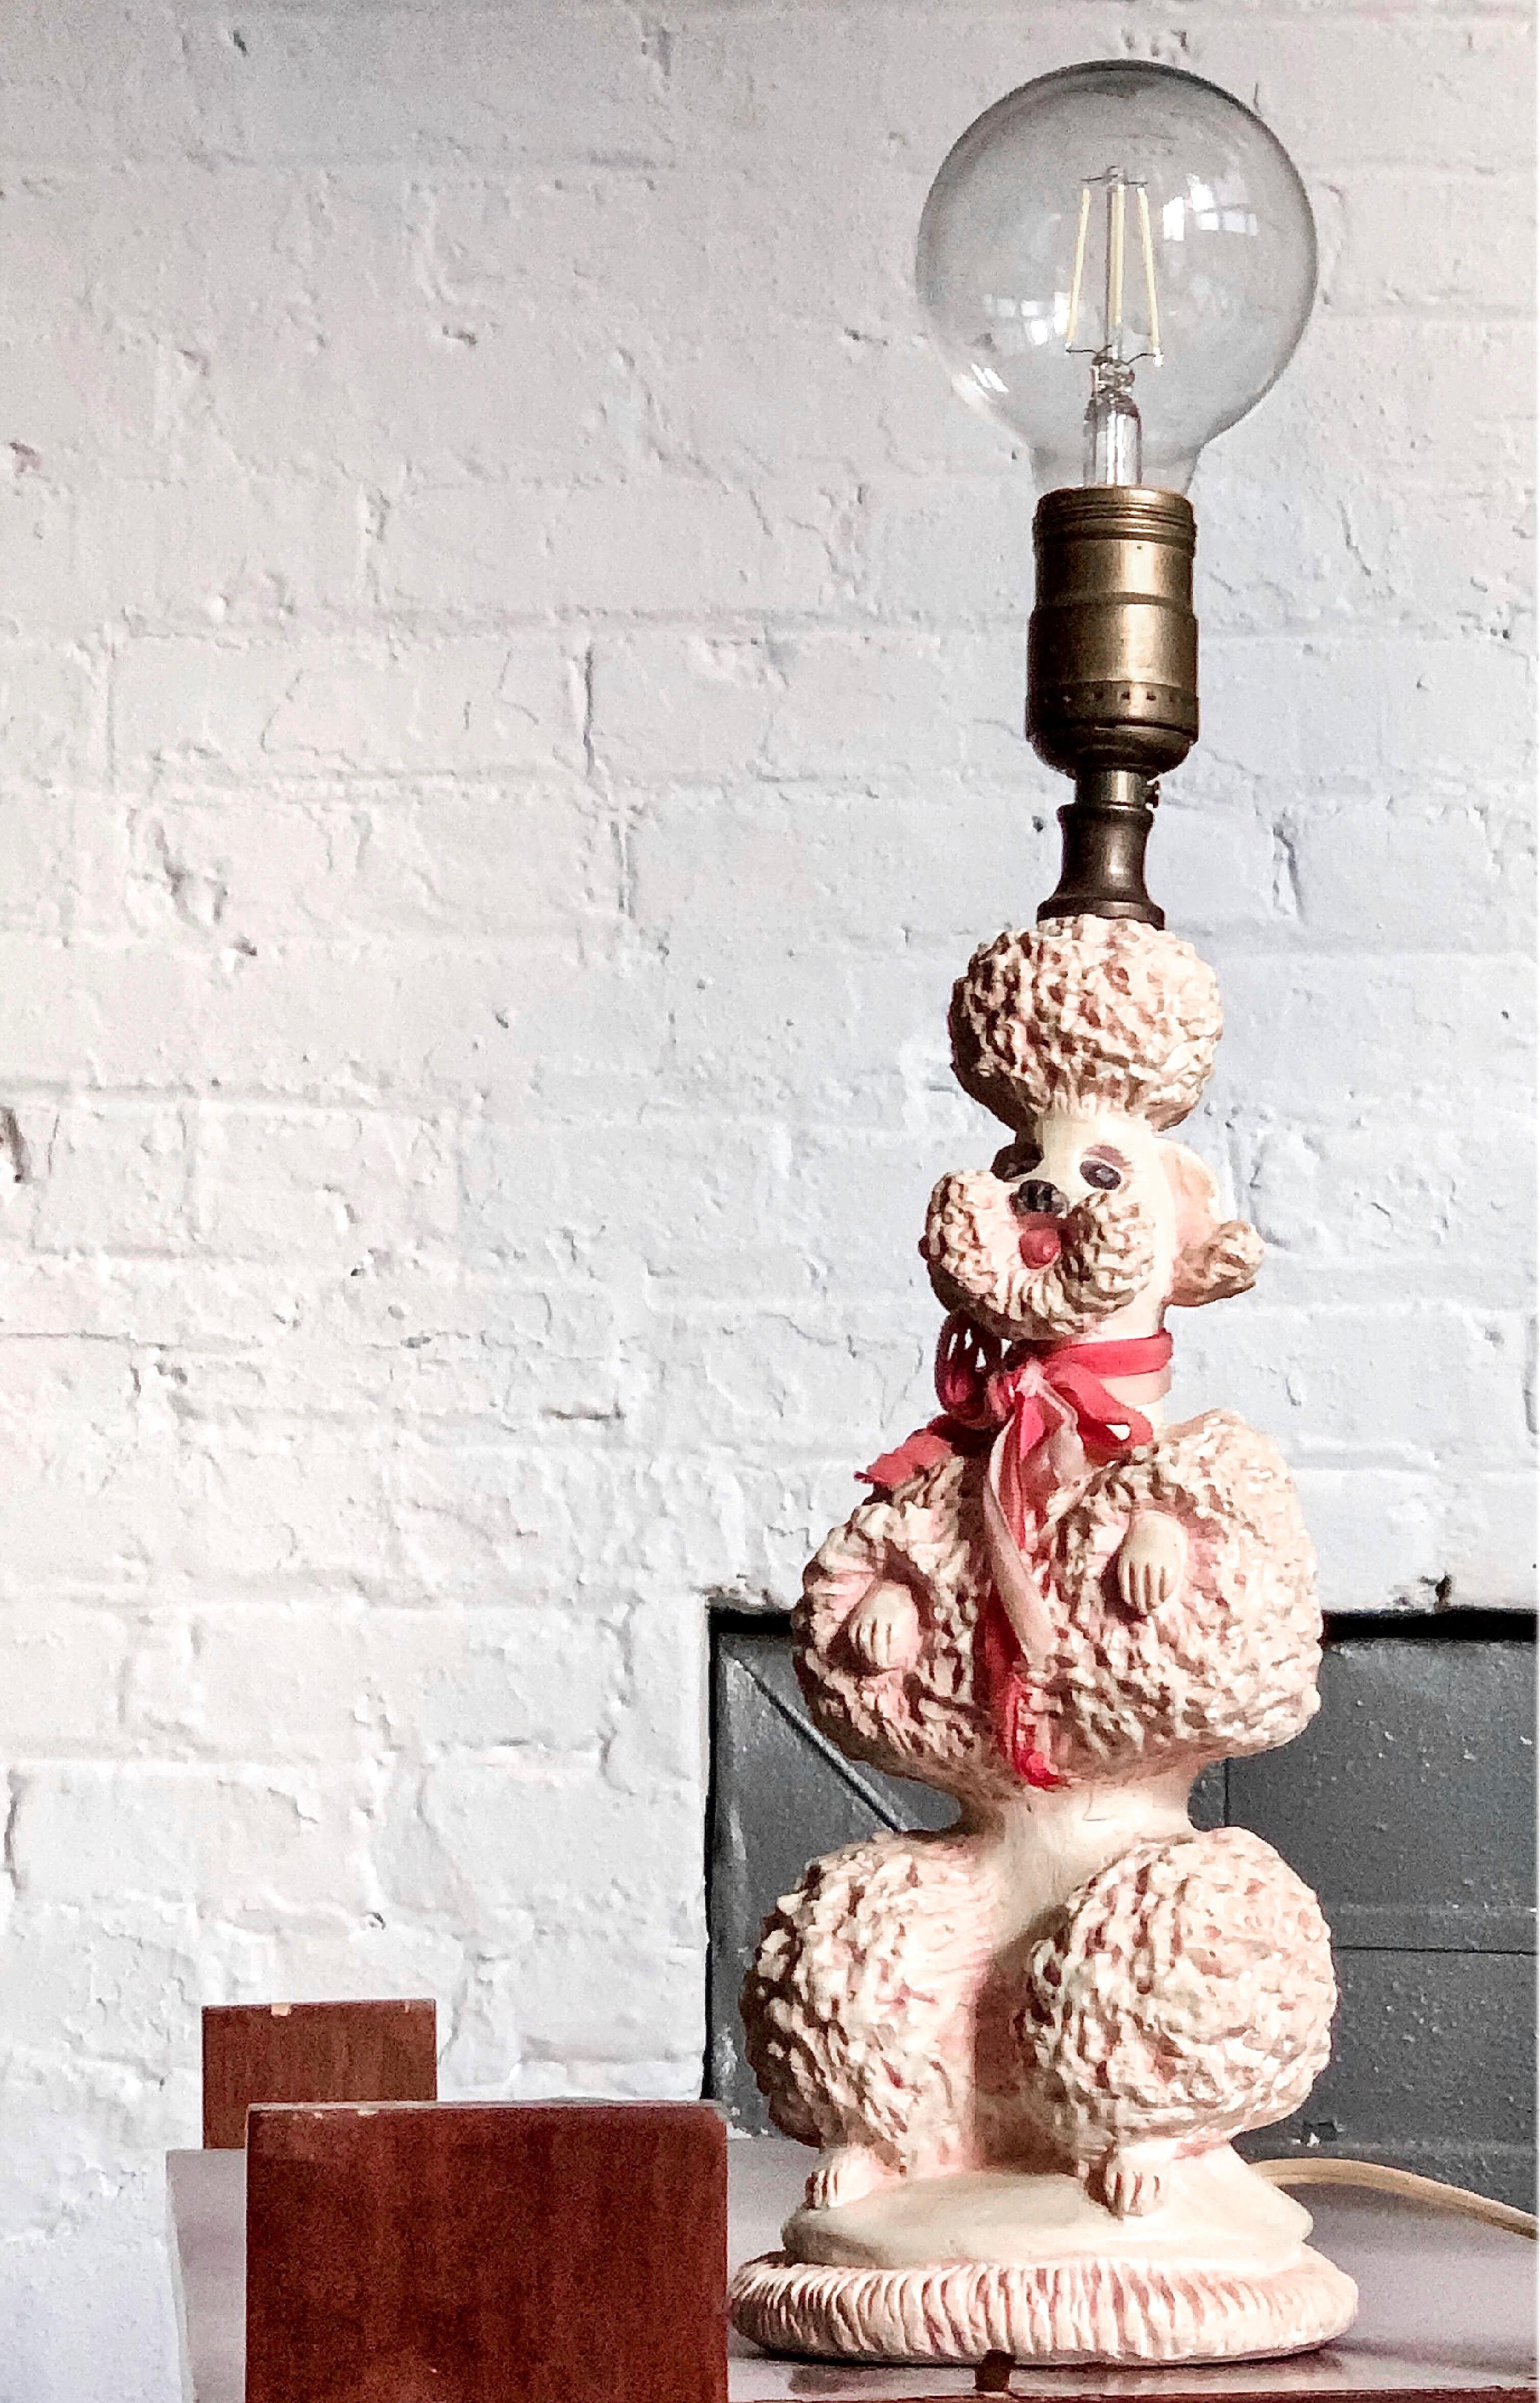 Vintage Hollywood Regency Phyllis Morris pink toy poodle table lamp, 1952.

Phyllis Morris’ first and most iconic design was the poodle lamp, circa 1952, which she often delivered to clients personally in her pink Cadillac convertible. After